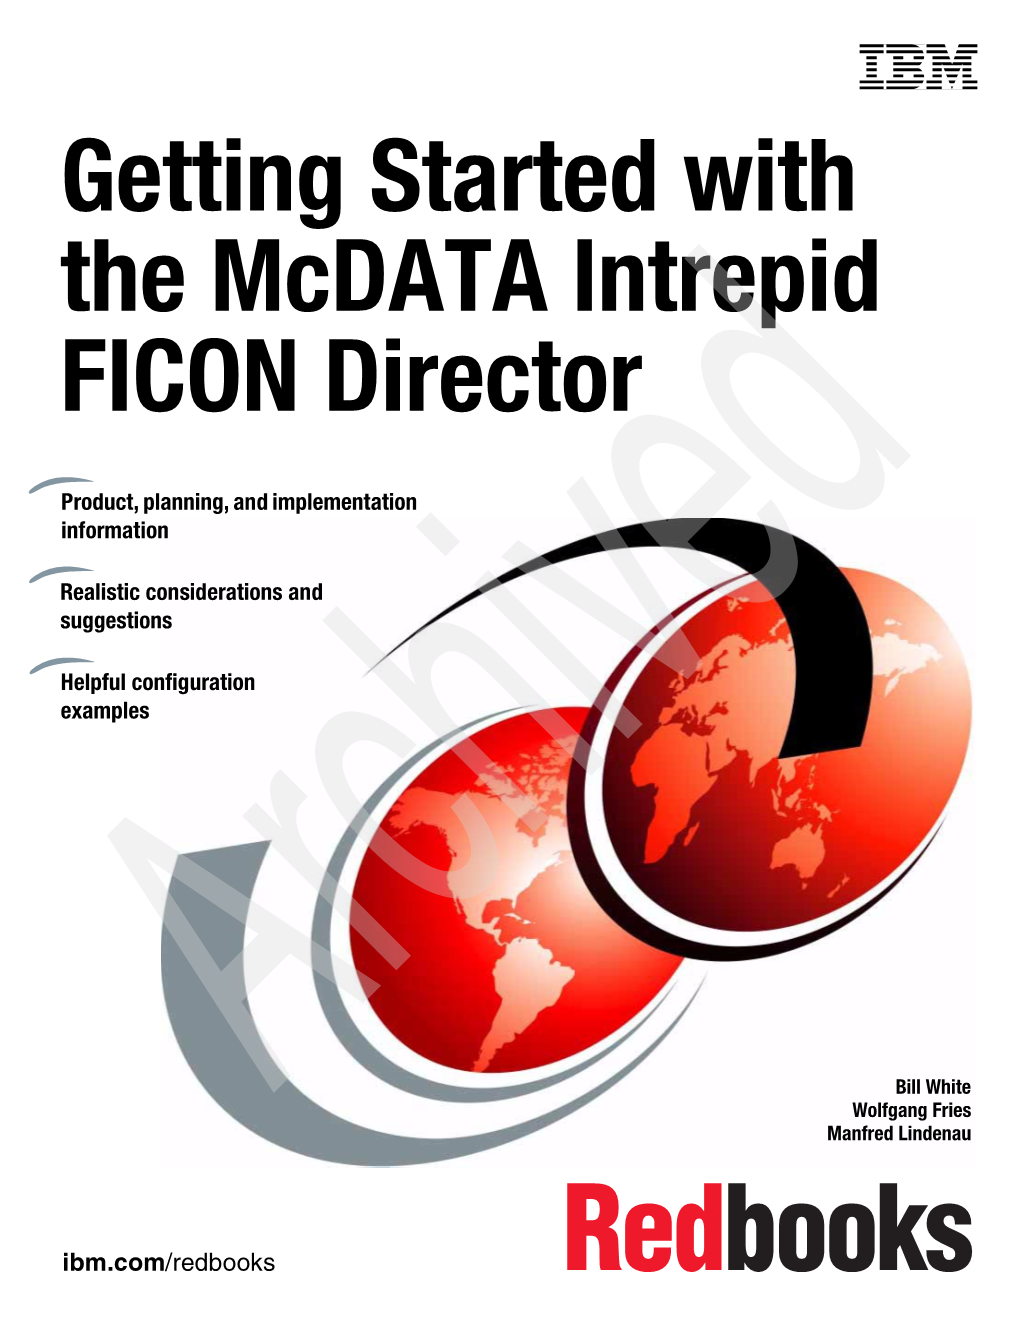 Getting Started with the Mcdata Intrepid FICON Director